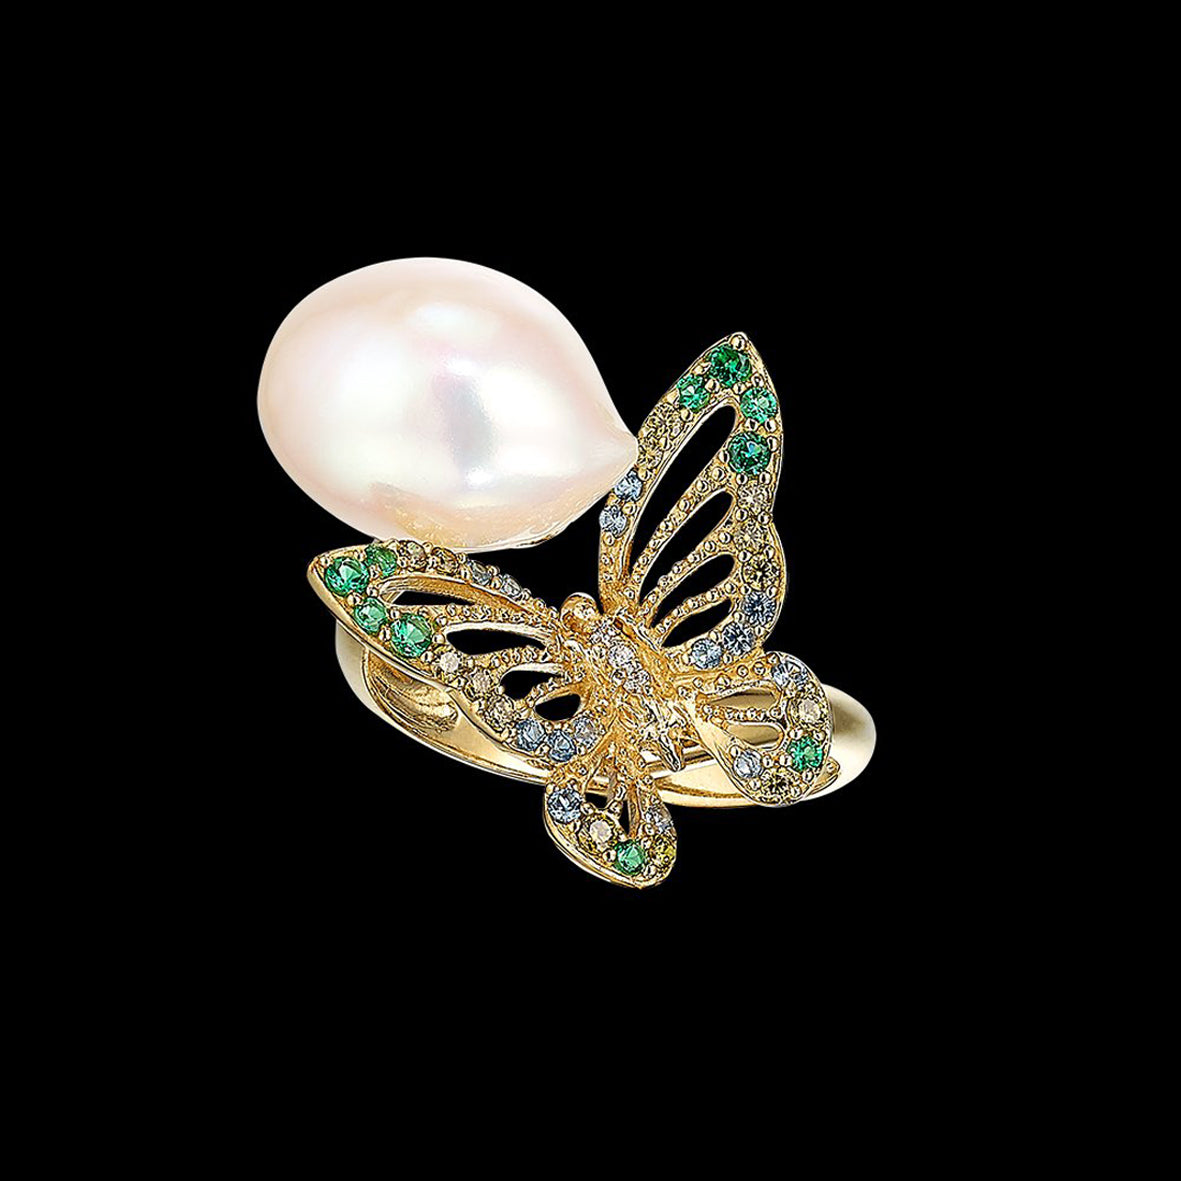 Gold, Black Enamel and Cultured Pearl Ring